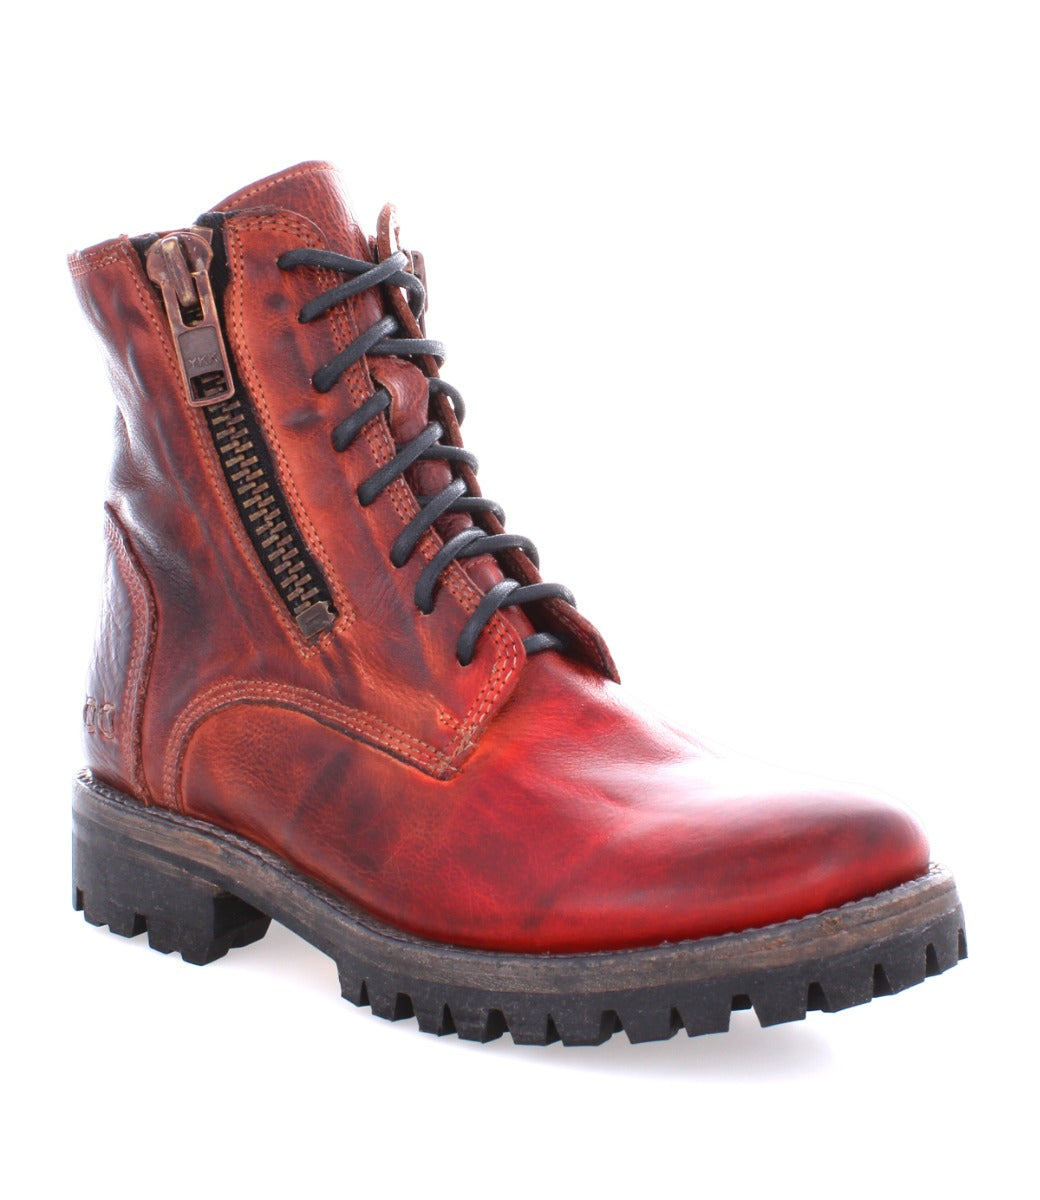 A men's red leather Tactic Trek boot with a zipper on the side by Bed Stu.